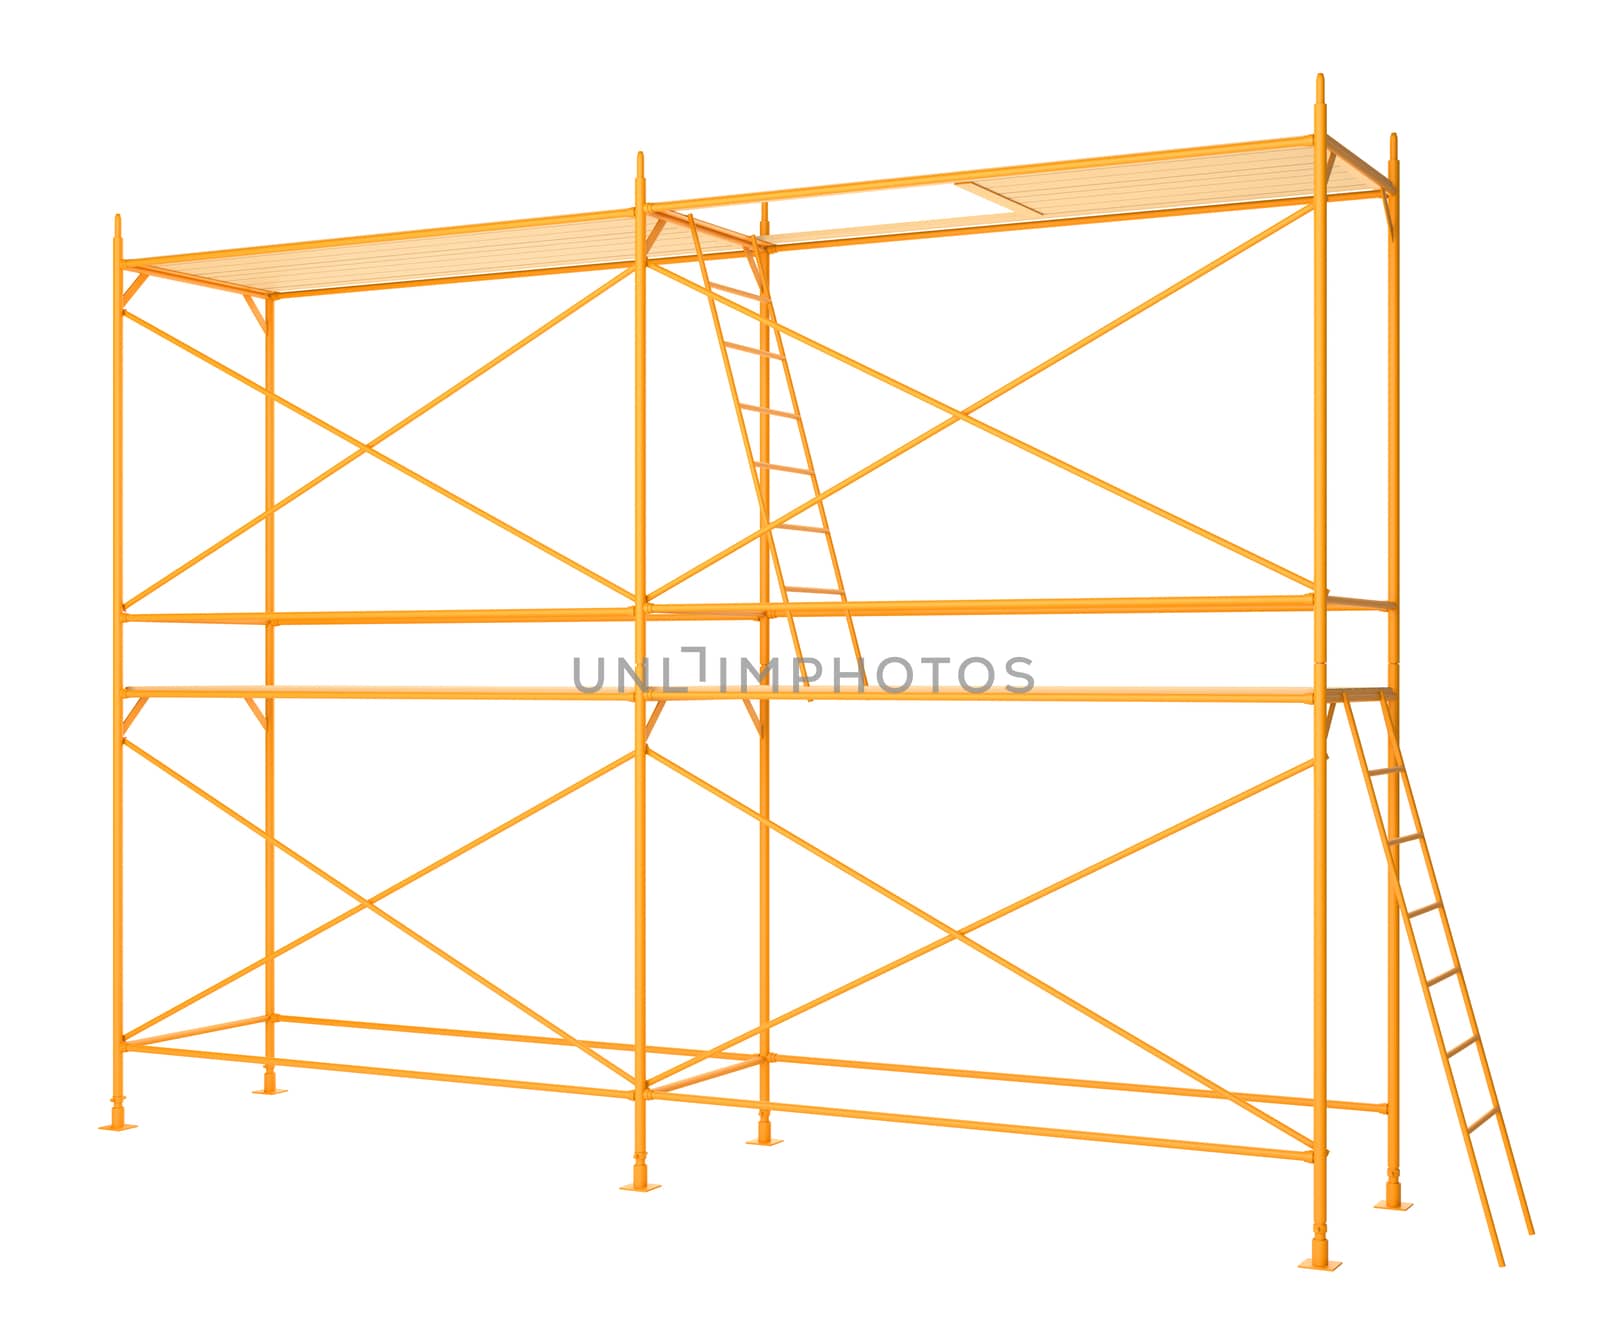 Scaffold isolated on white background. 3D illustration